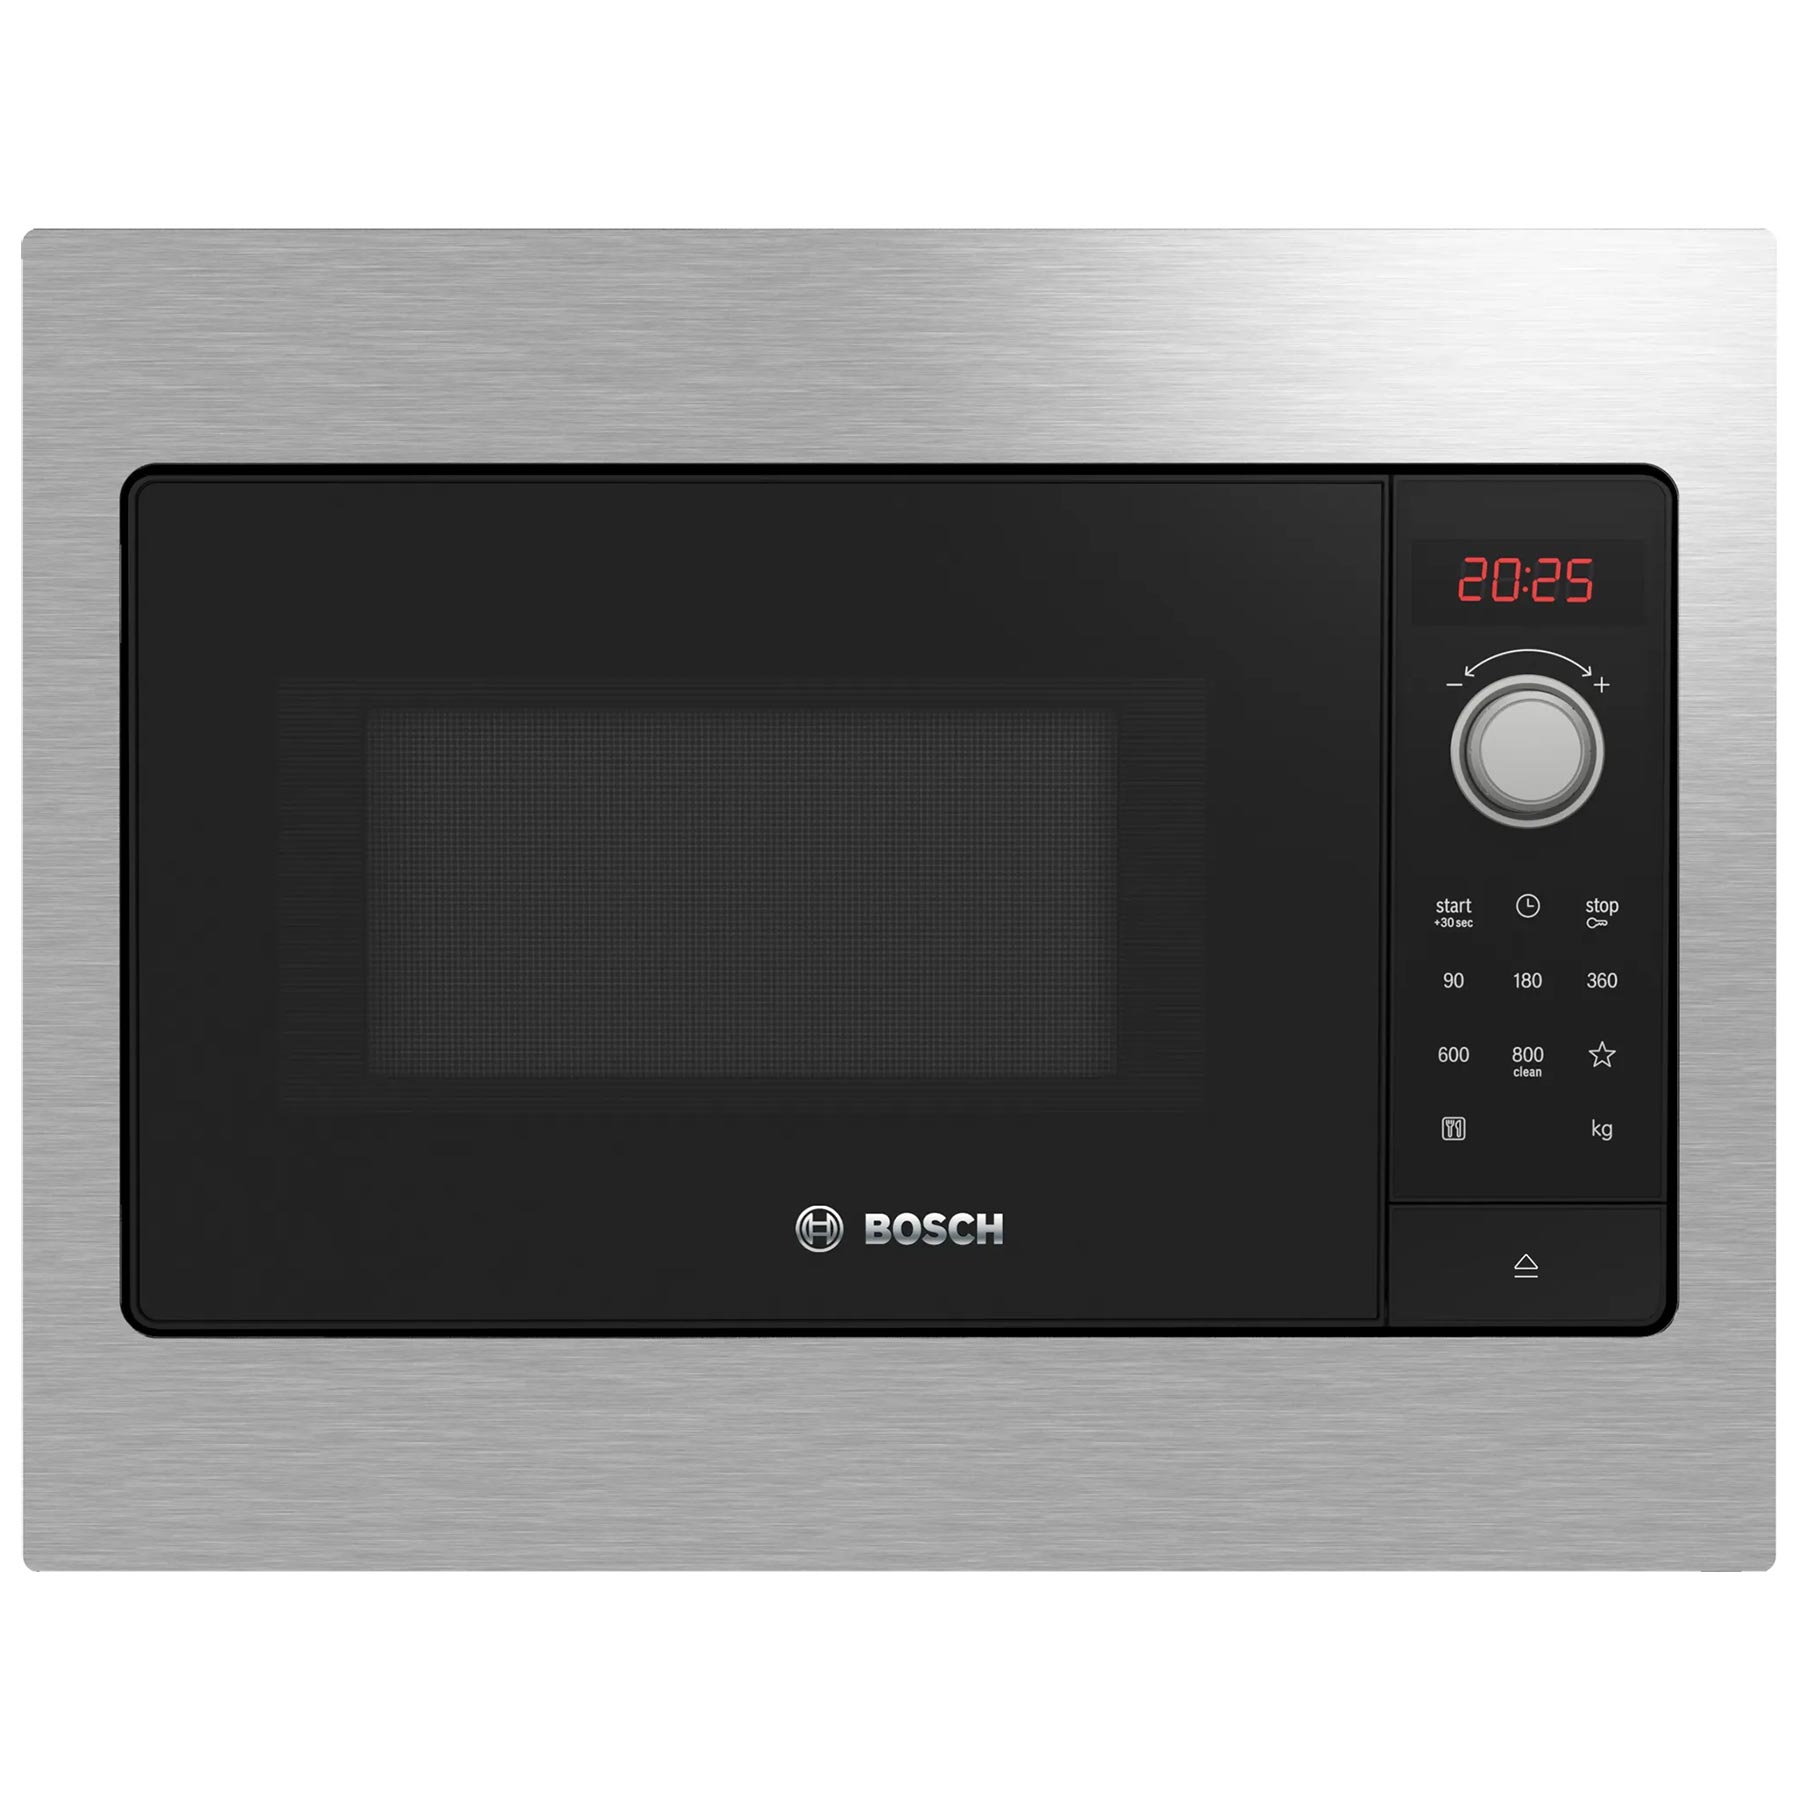 Bosch BFL523MS3B Series 2 Built in Compact Microwave Oven Black 800W 2